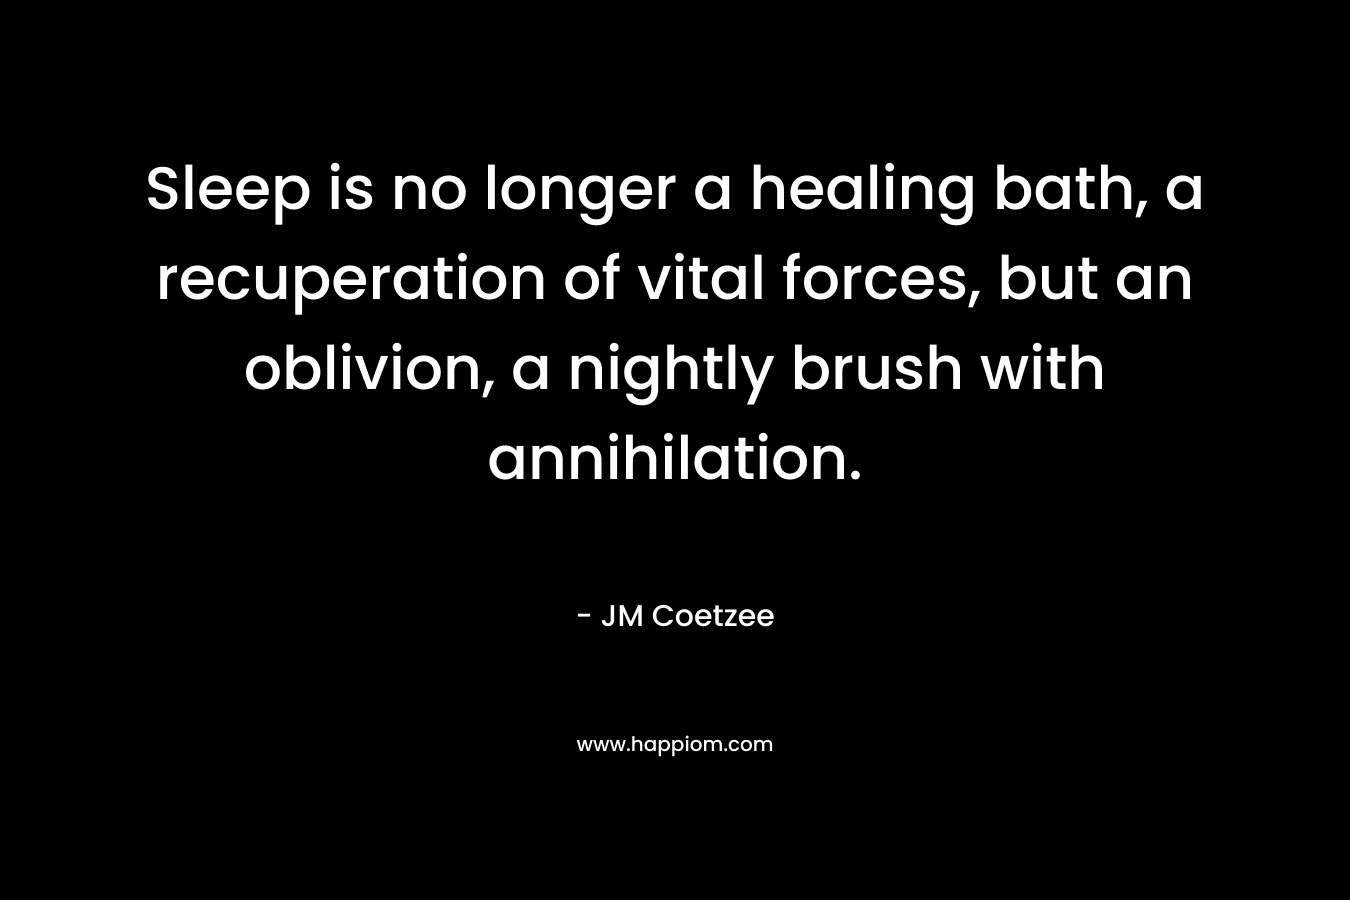 Sleep is no longer a healing bath, a recuperation of vital forces, but an oblivion, a nightly brush with annihilation. – JM Coetzee